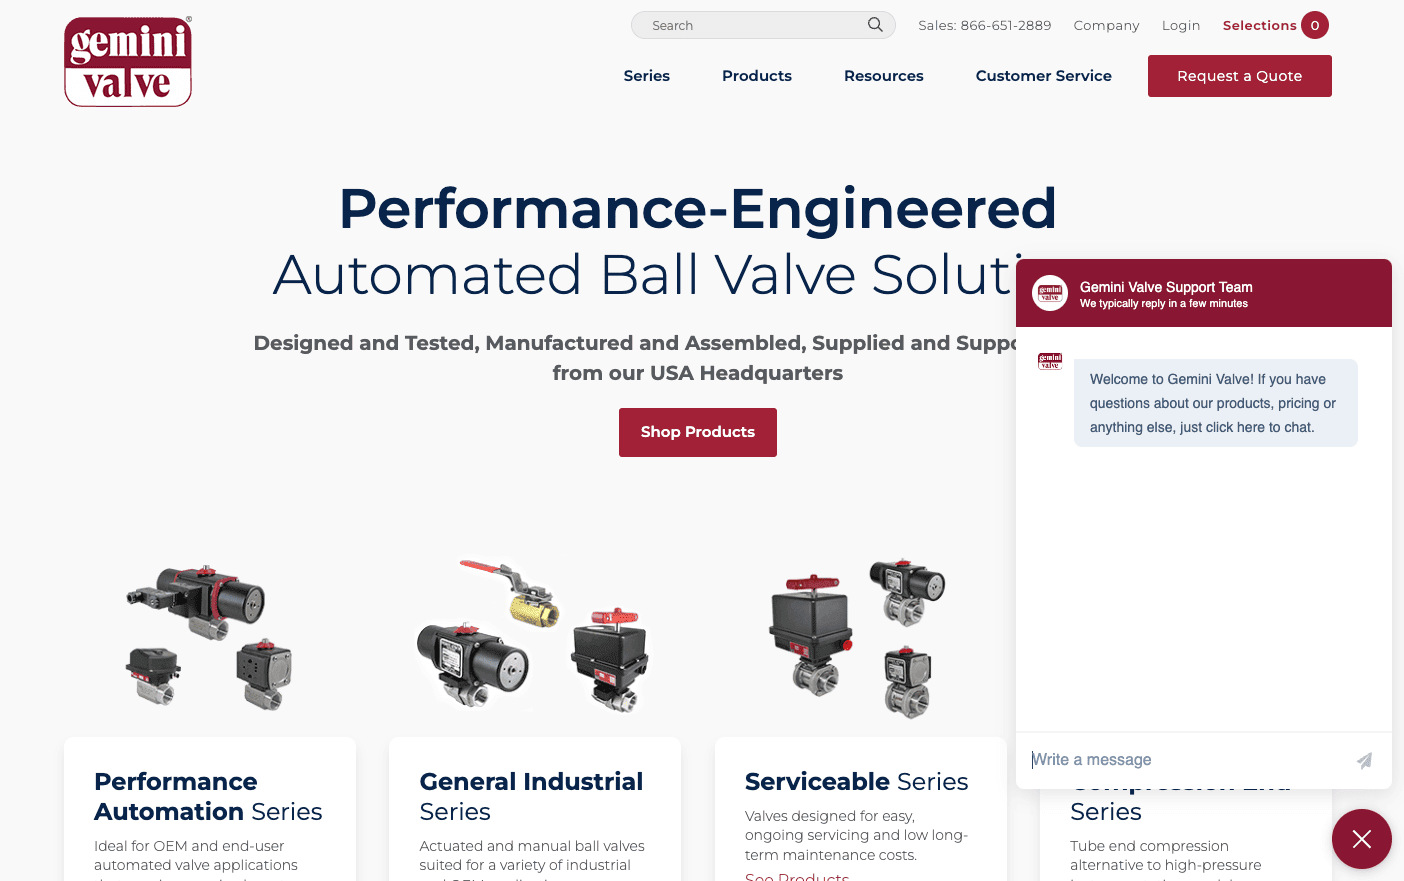 The homepage of Gemini Value, a ball valve supplier, showing photos of ball valve products. A chat window is open in the bottom right.